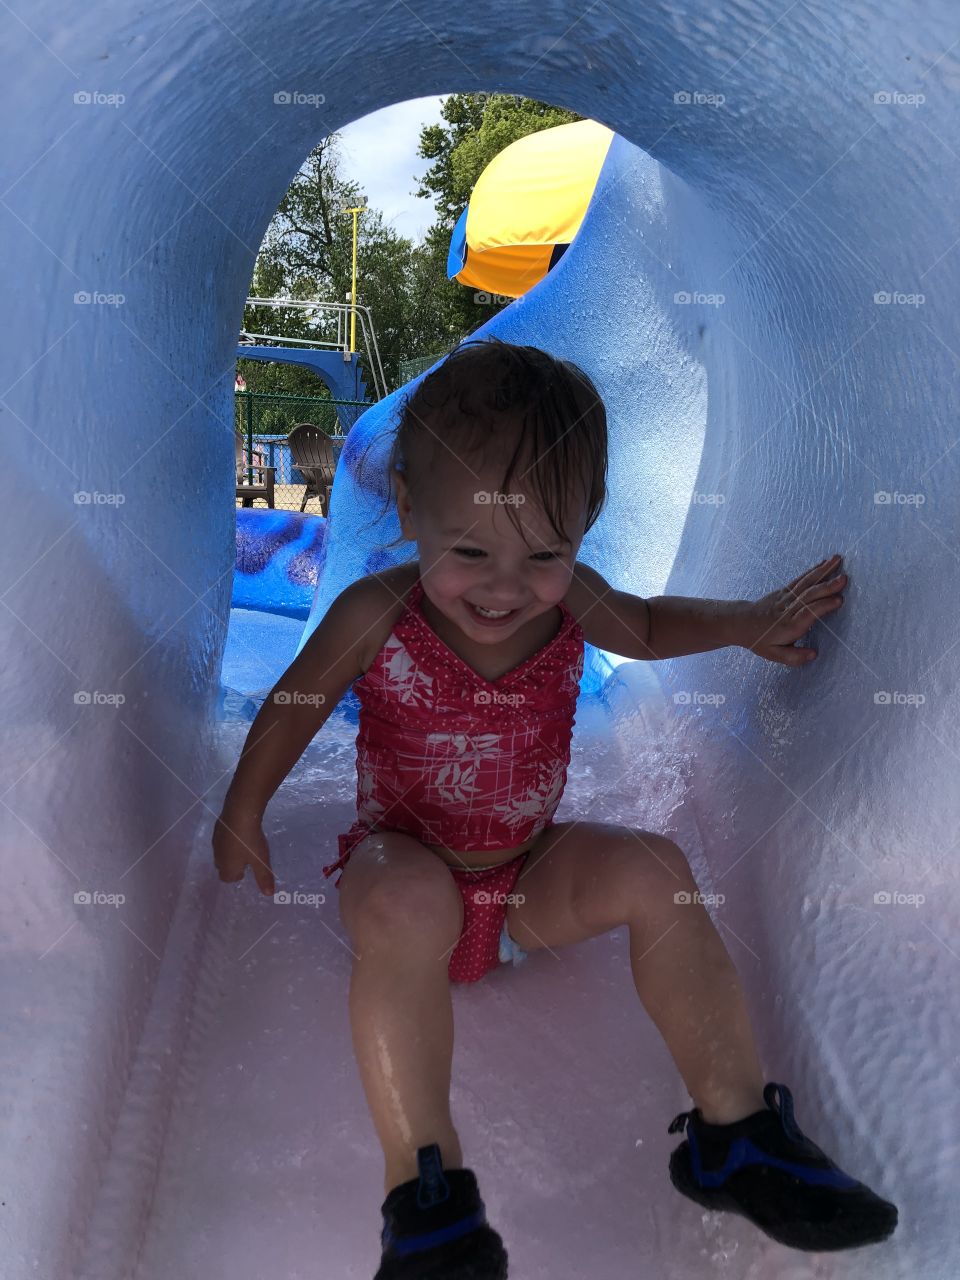 Toddler girl going down a water slide